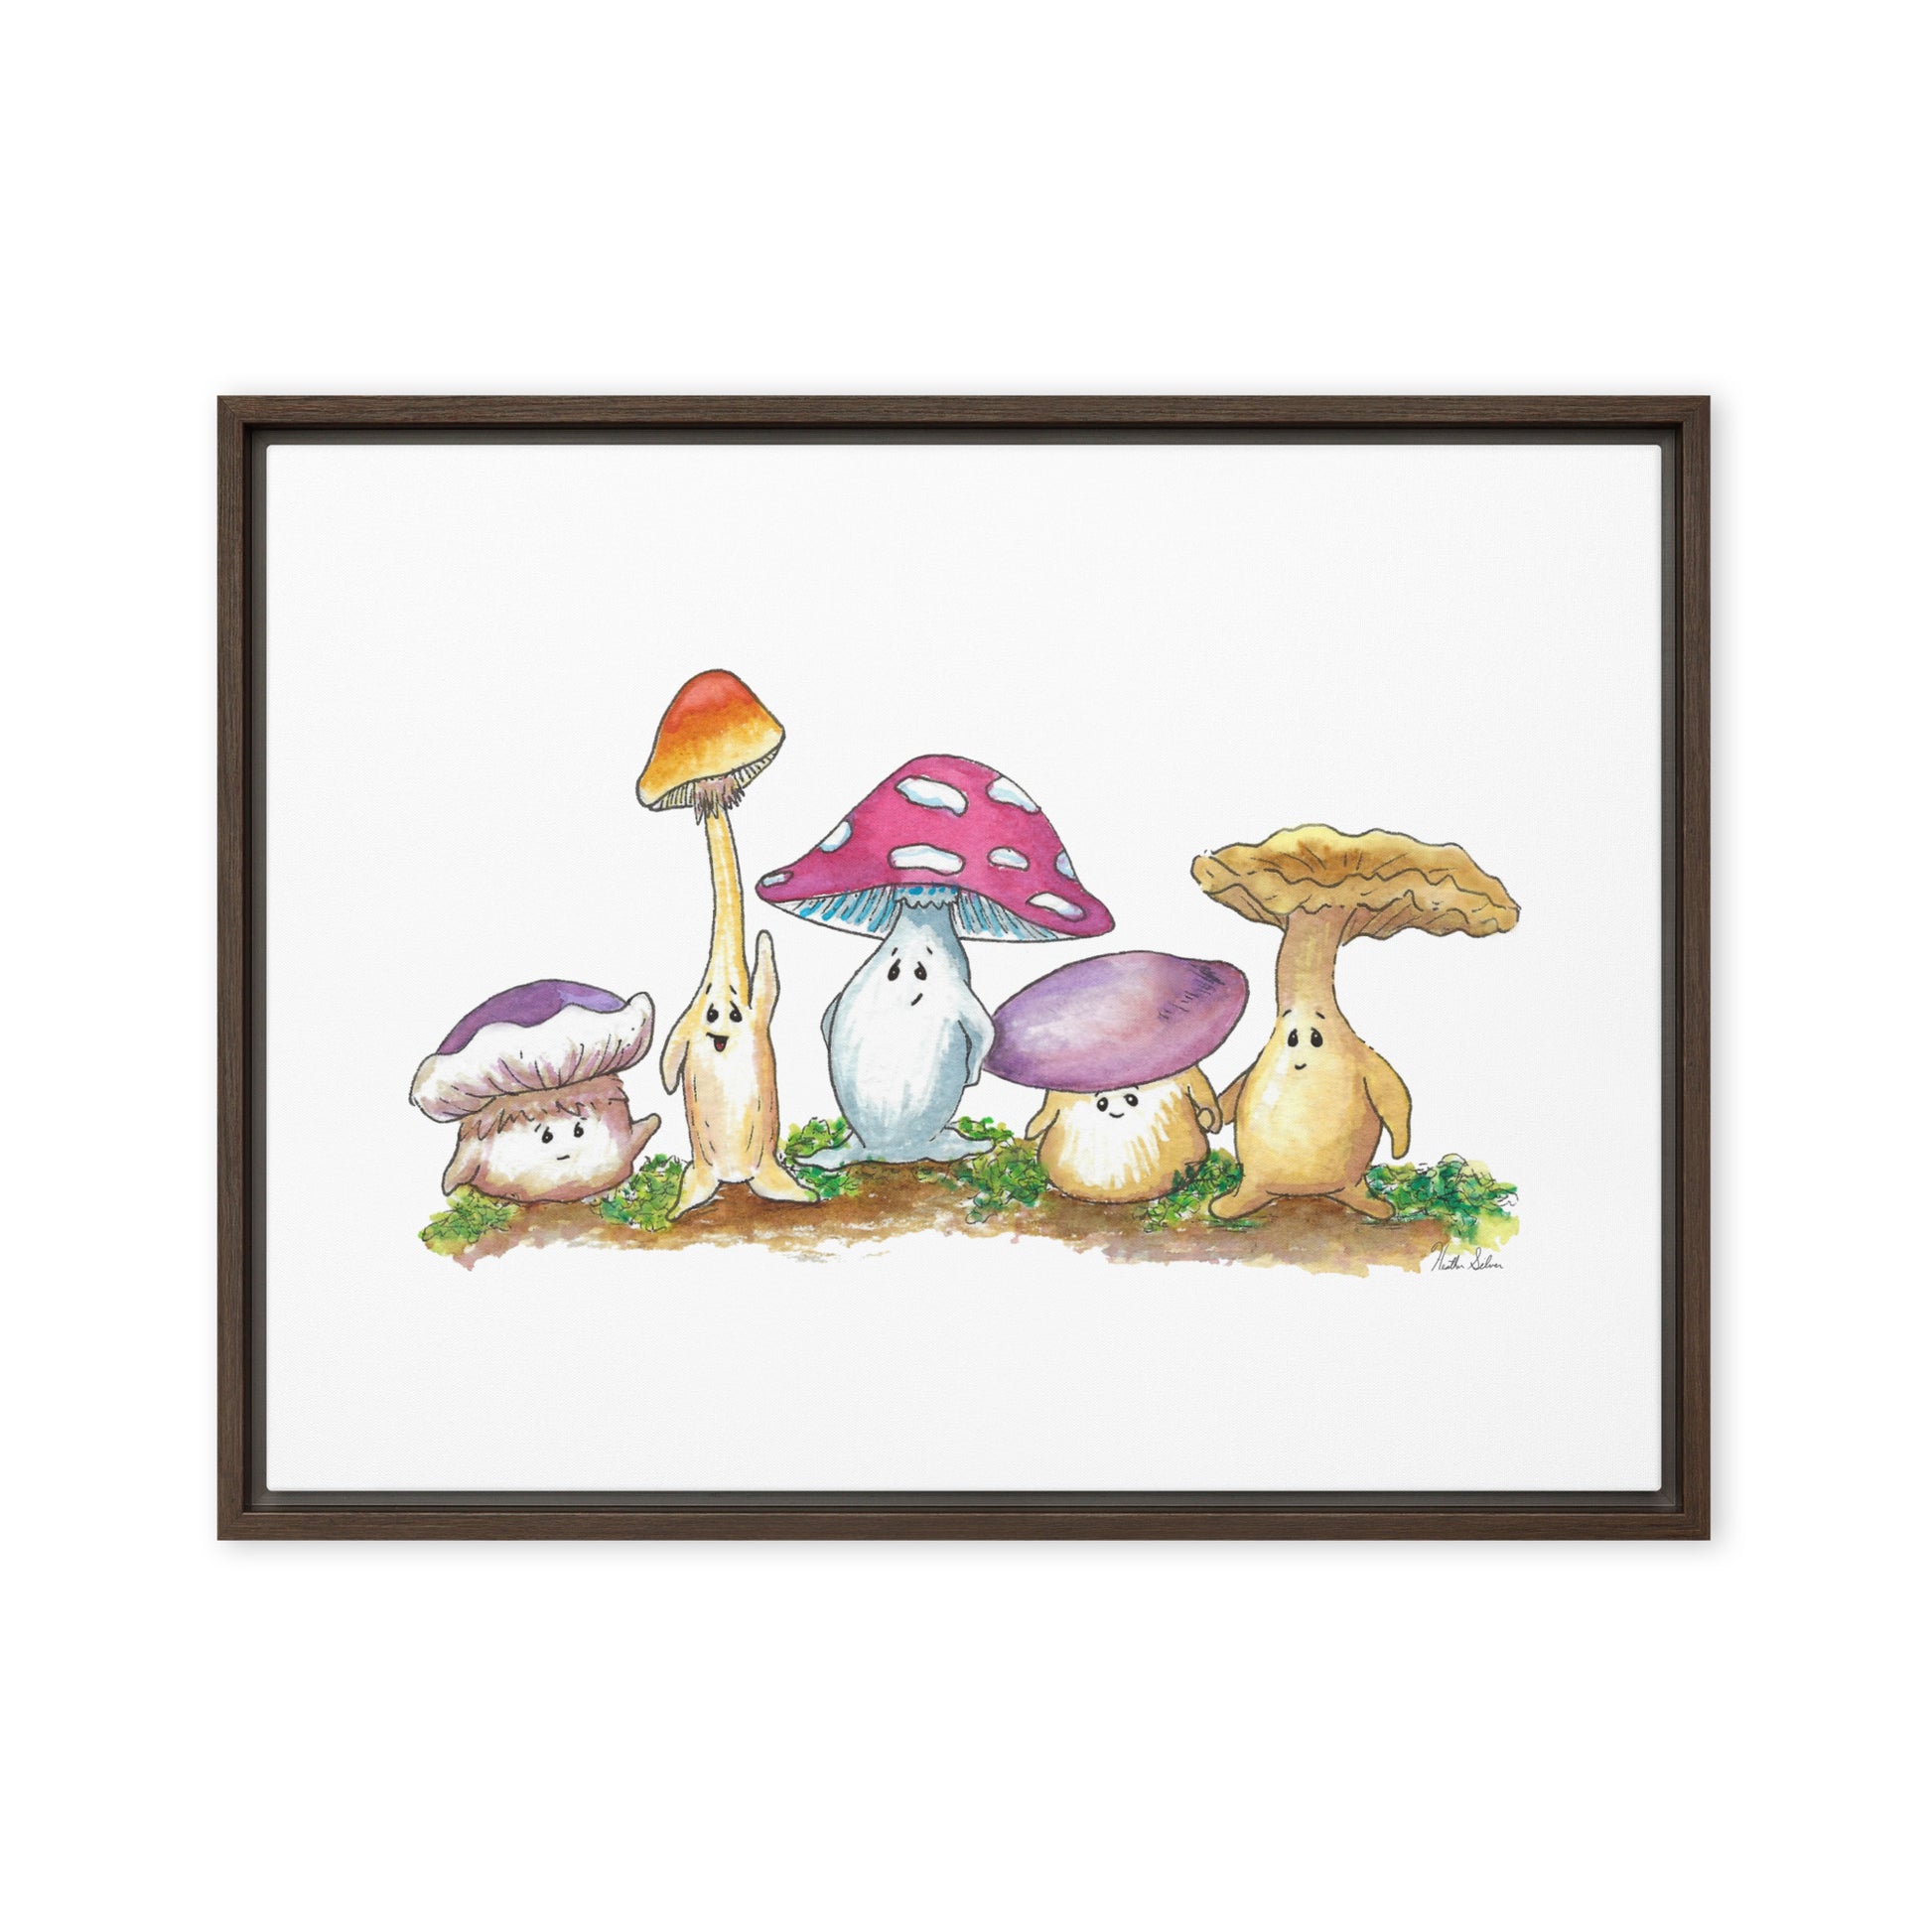 18 by 24 inch canvas print of Heather Silver's watercolor painting, Mushy and Friends. Framed in a dark brown pine wood frame that gives it a floating canvas effect.